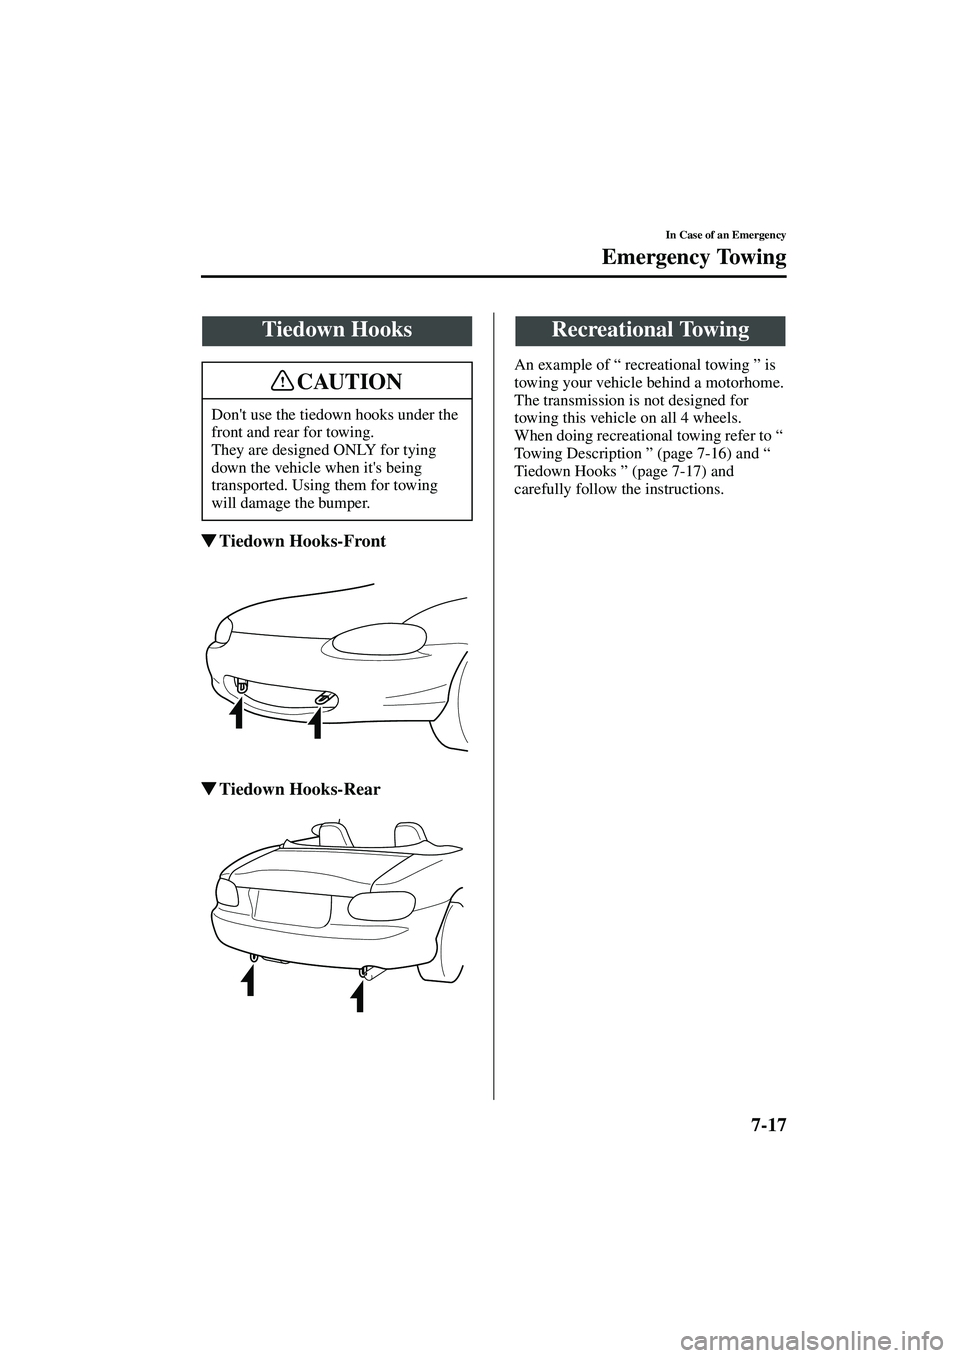 MAZDA MODEL MX-5 MIATA 2004  Owners Manual 7-17
In Case of an Emergency
Emergency Towing
Form No. 8S15-EA-03G
Tiedown Hooks-Front
 Tiedown Hooks-Rear
An example of 
“ recreational towing ”  is 
towing your vehicle behind a motorhome.
The